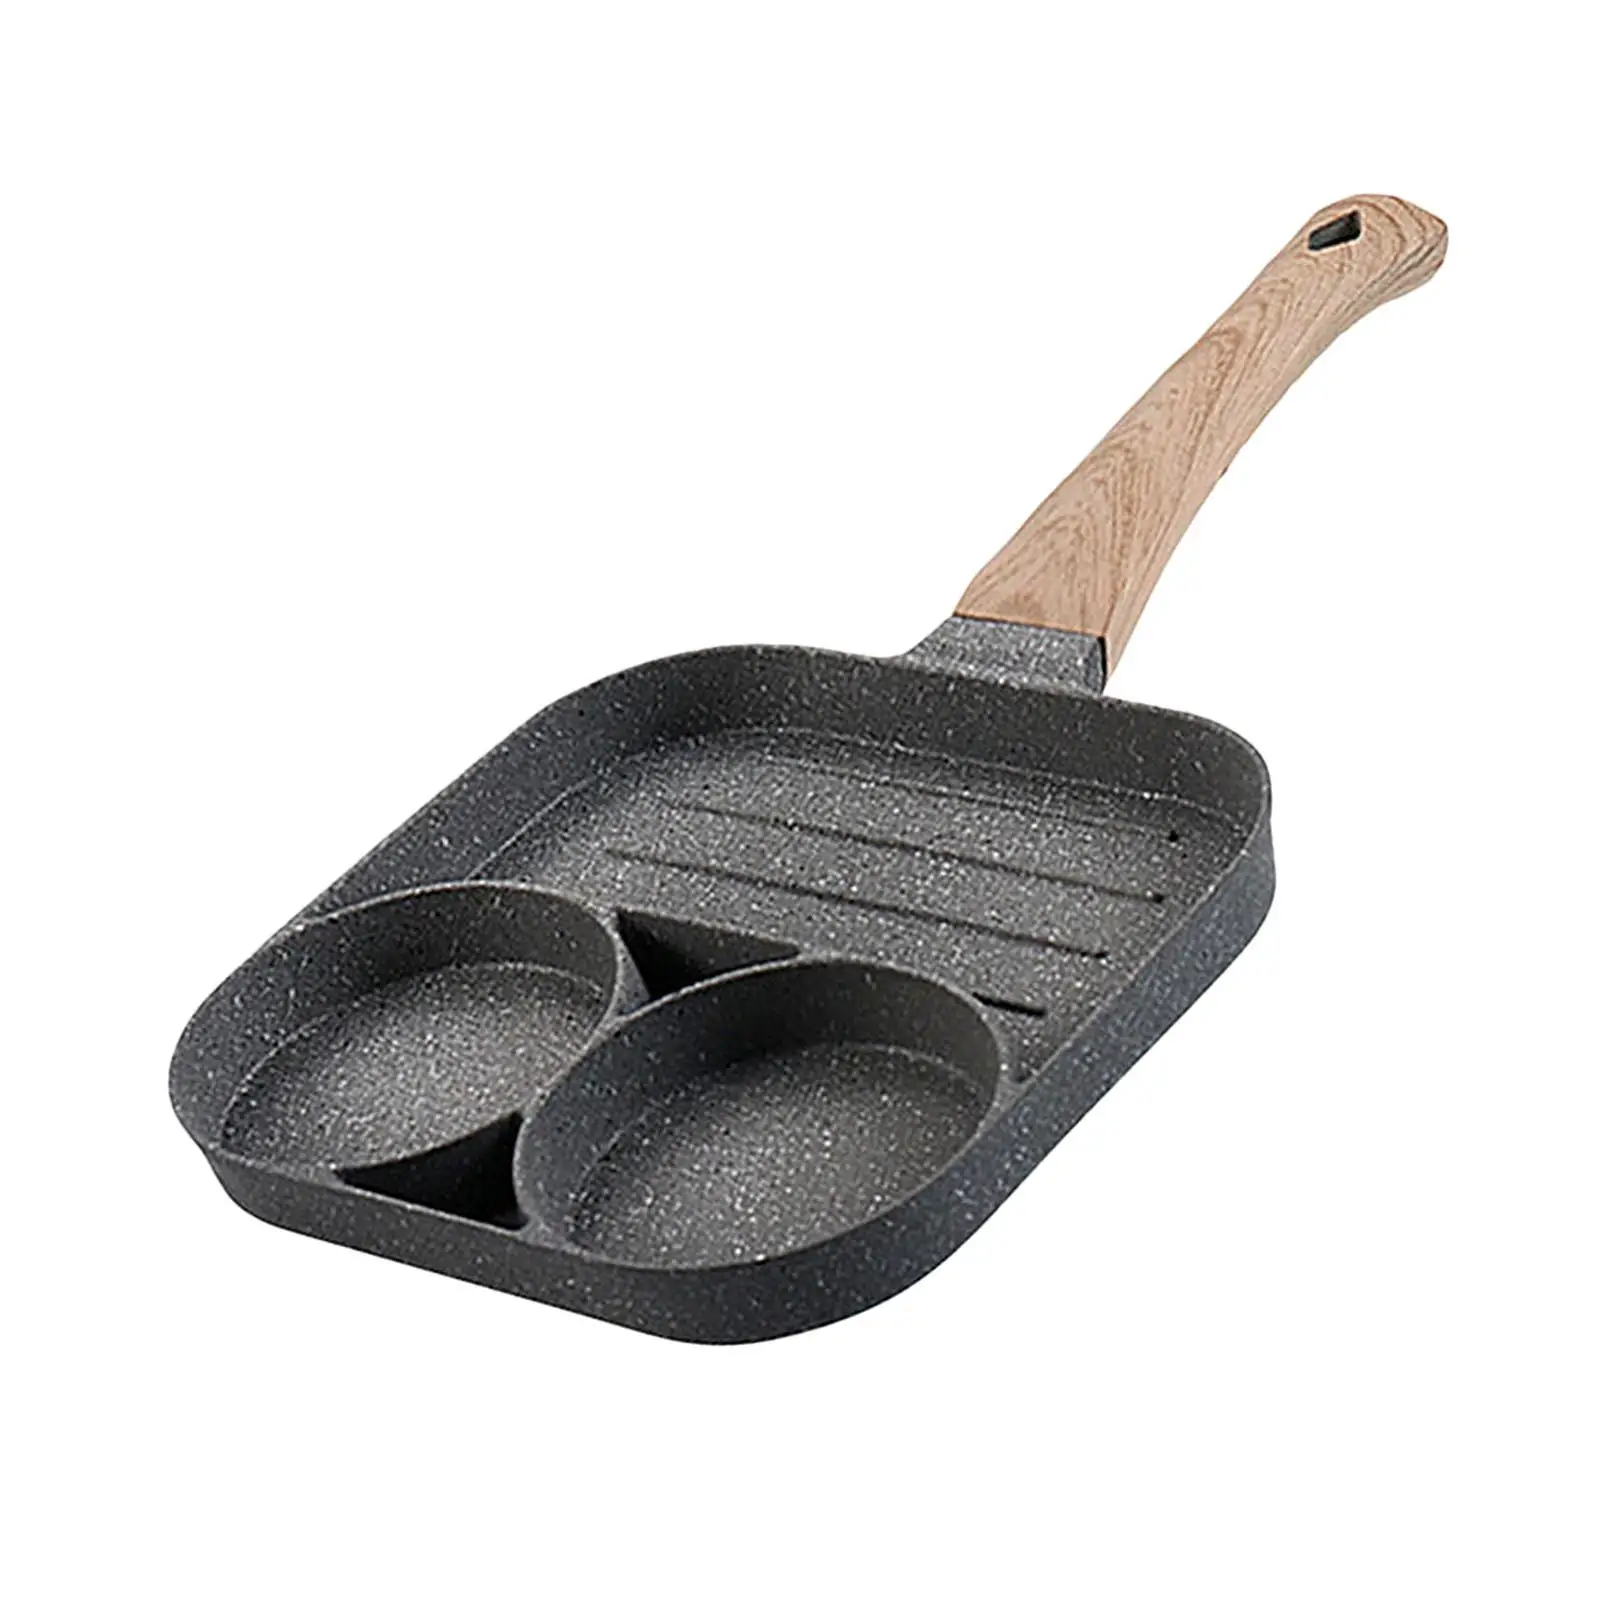 Stone Egg Frying Pan 3-Cup Steak Sausage Cooker Pan with Long Handle